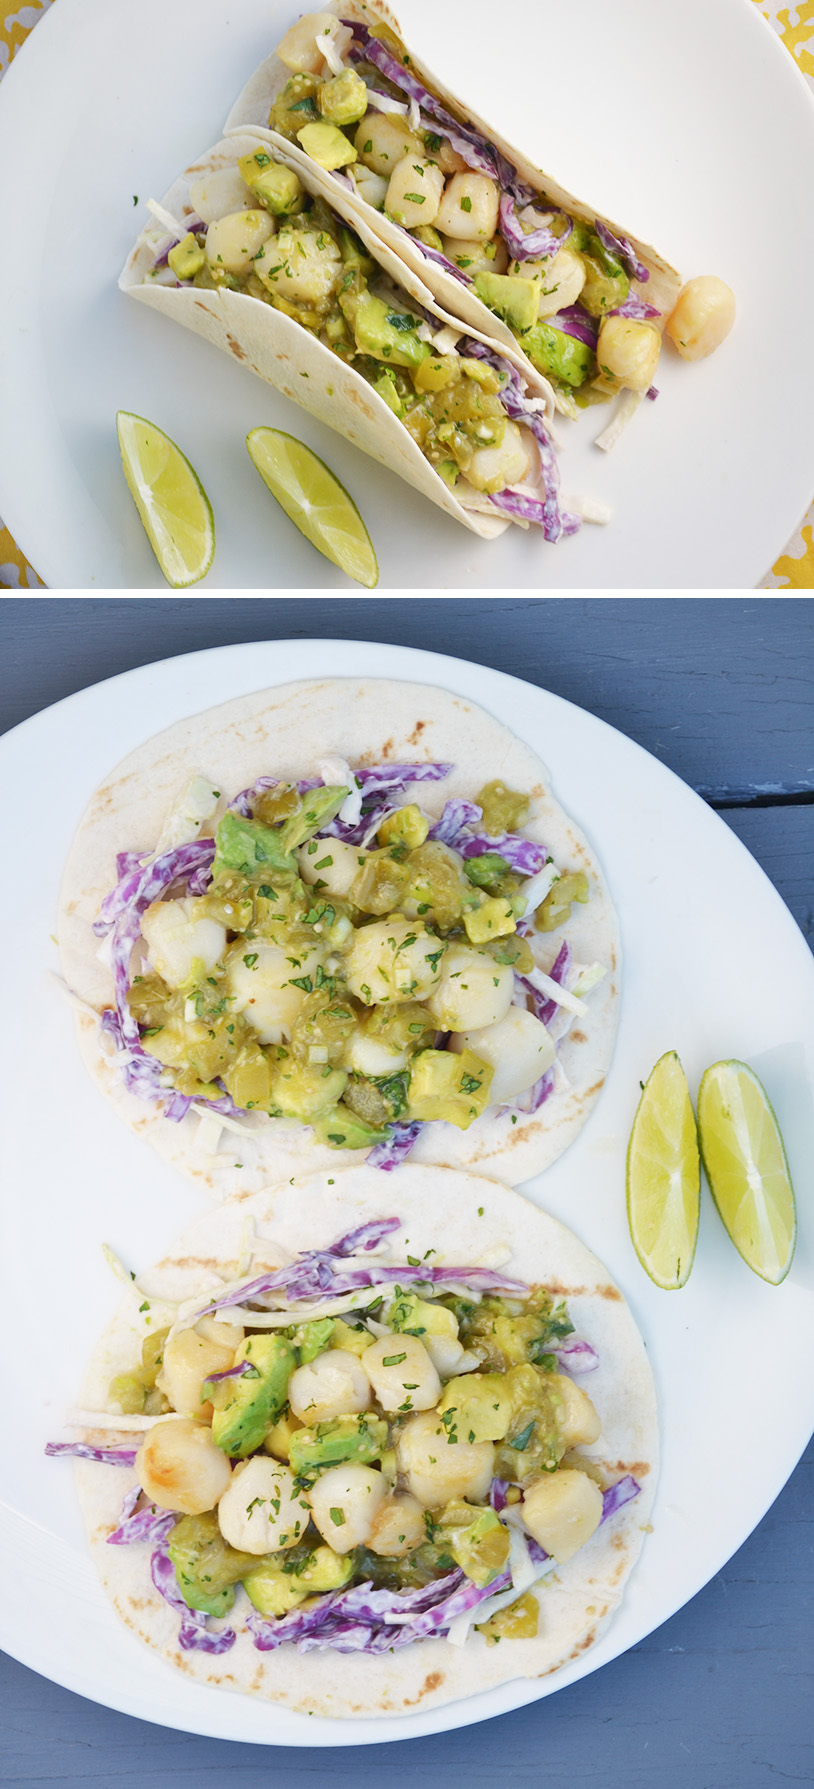 Scallop Tacos with Avocado Salsa Verde and Cumin Scented Slaw